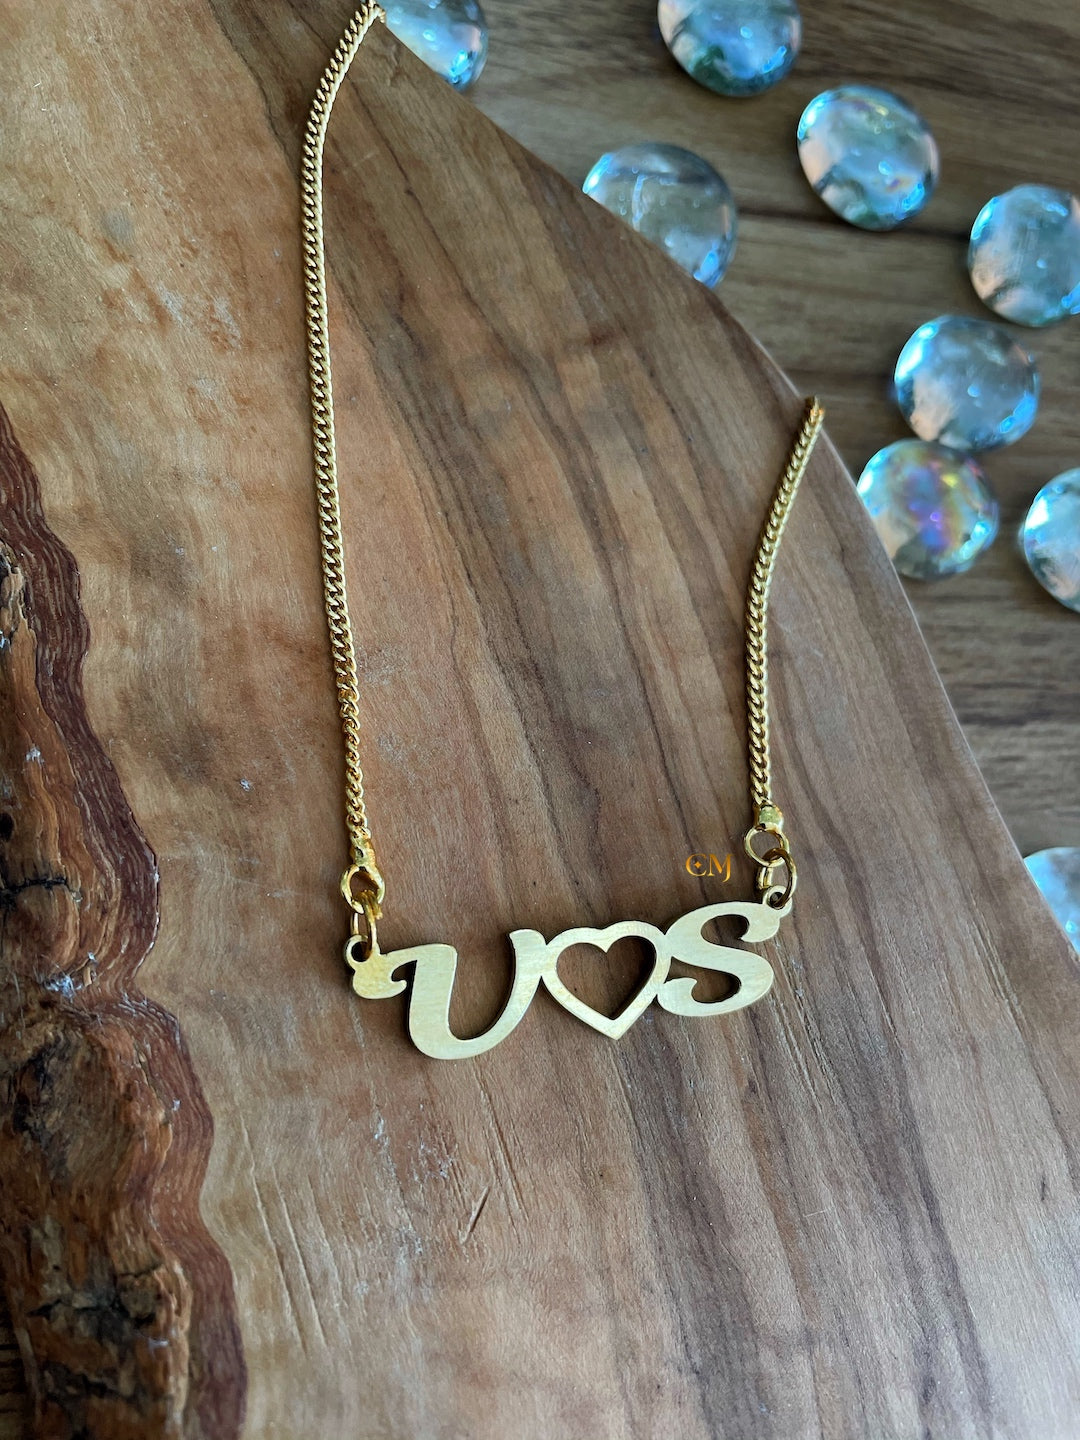 Jewelry for Moms - Three Disc Necklace in 10K Gold - MYKA